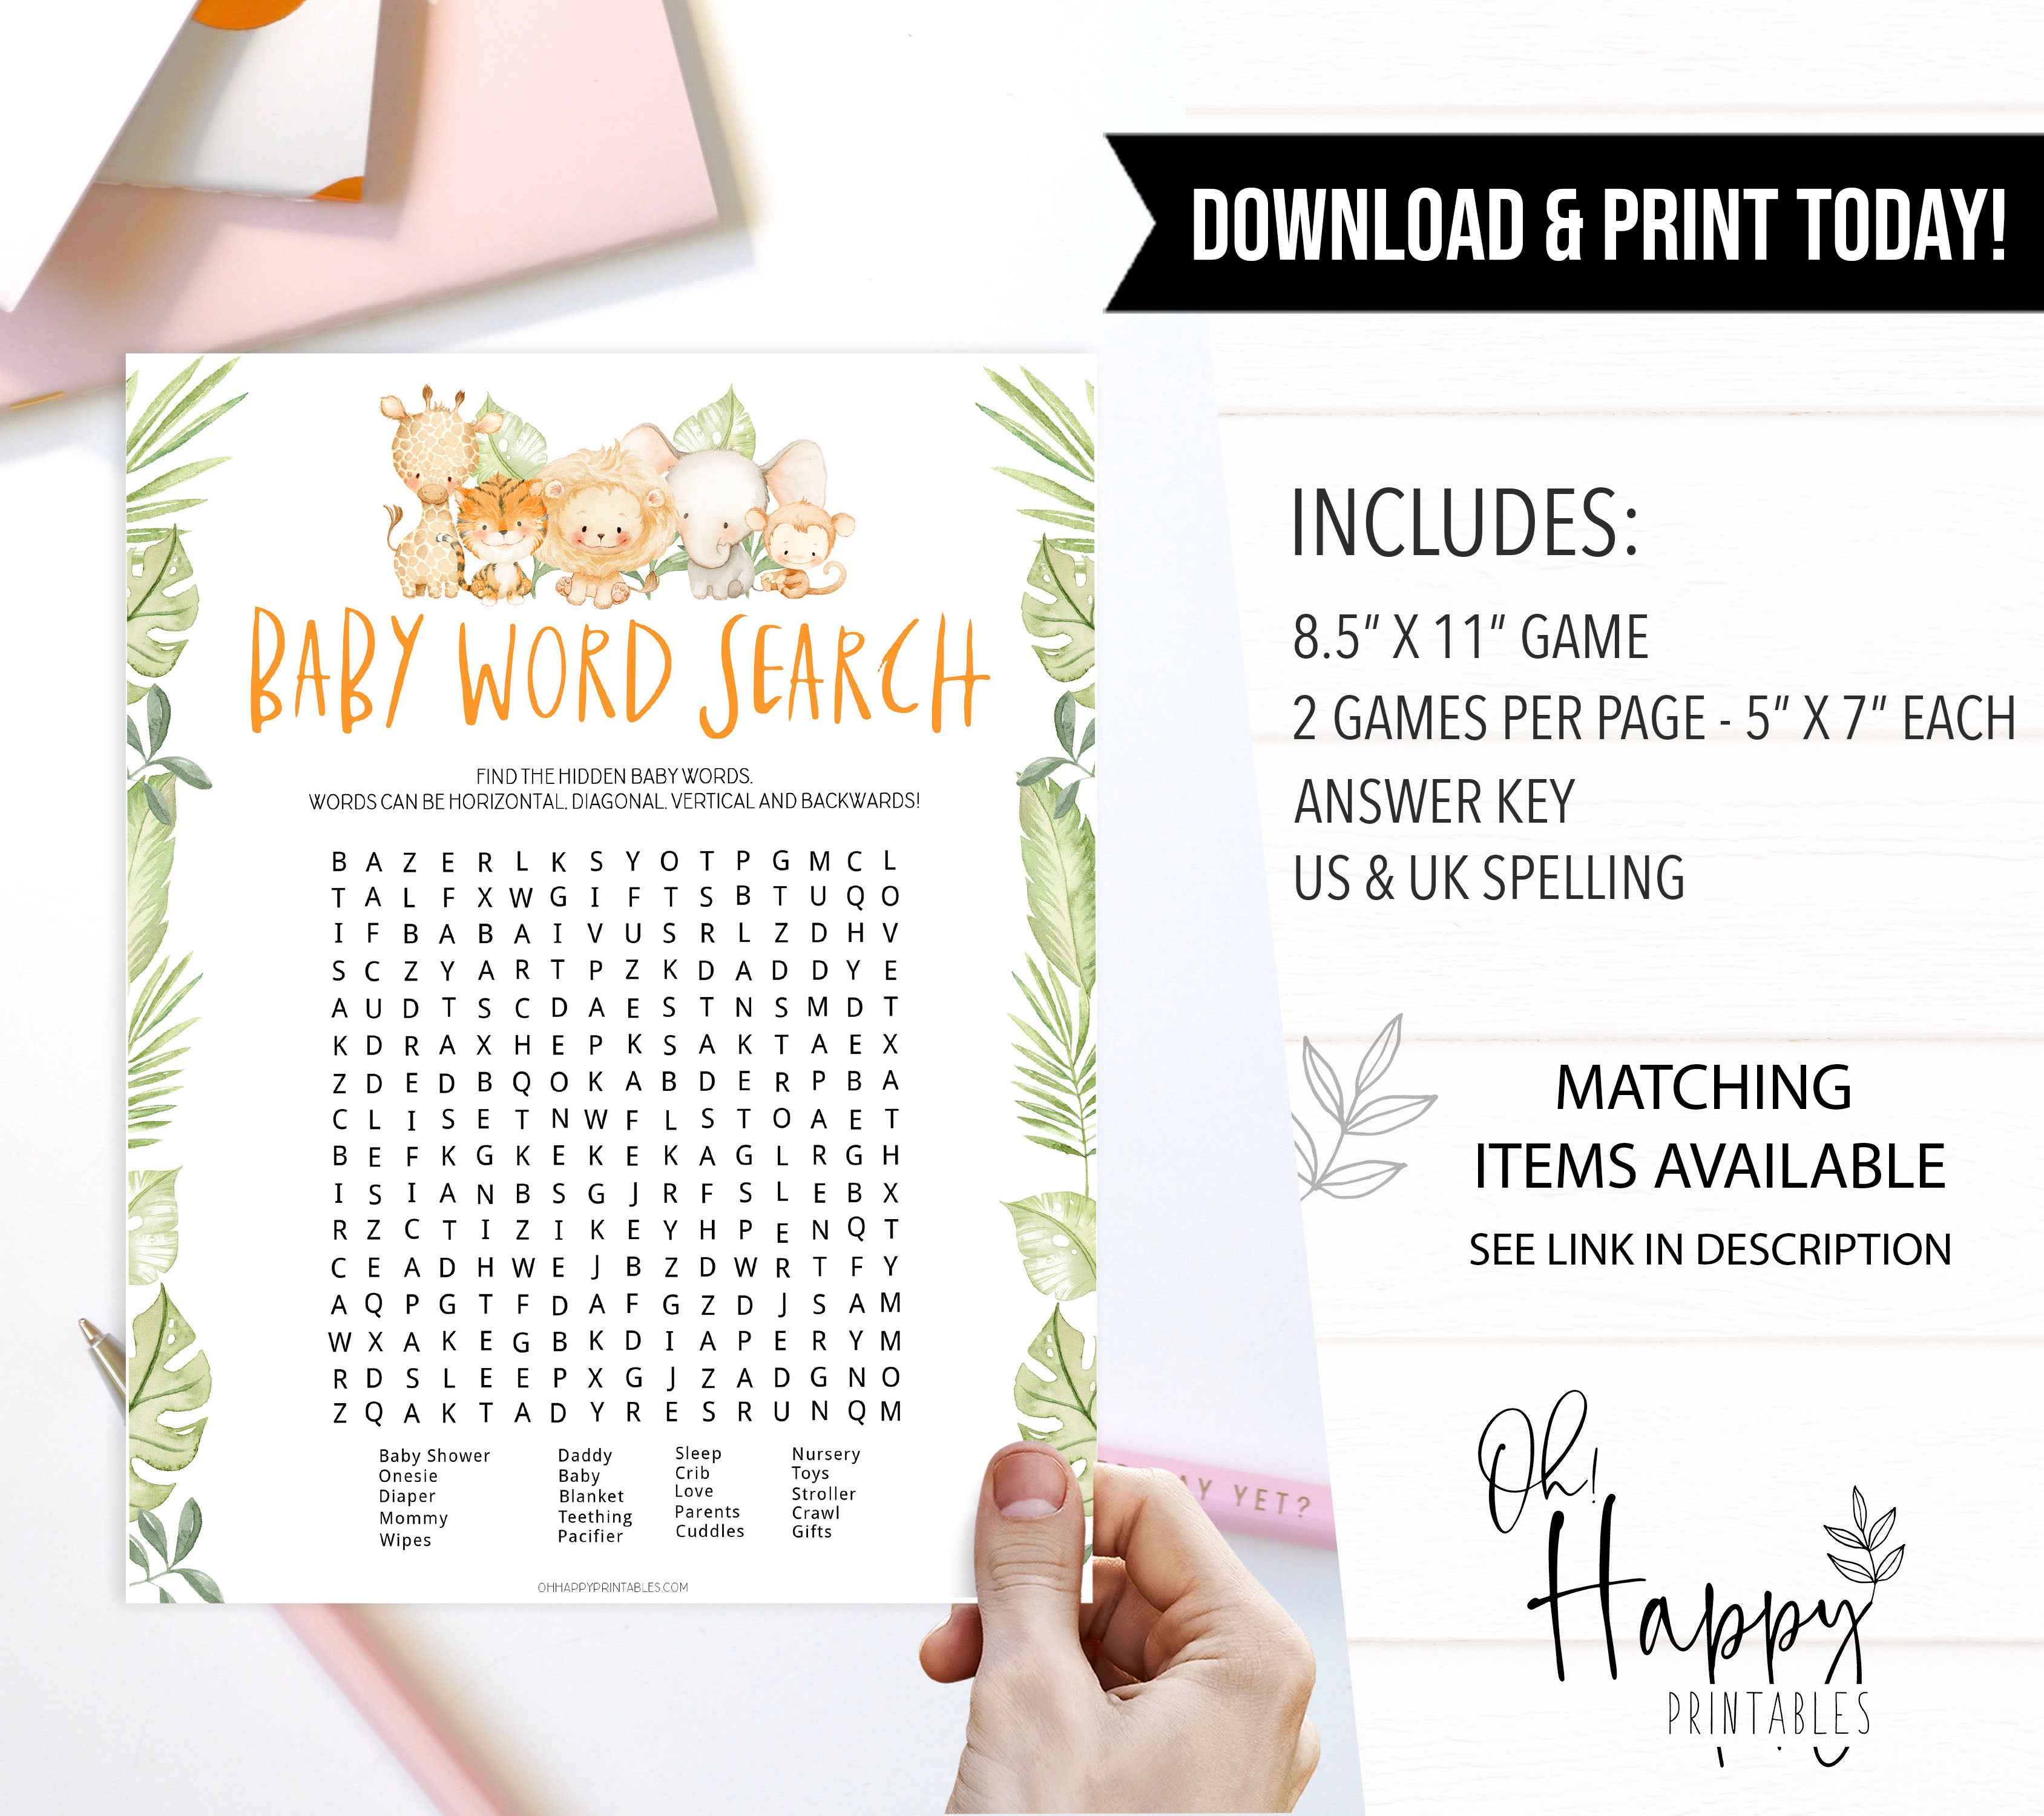 baby shower word search game, baby word search, Printable baby shower games, safari animals baby games, baby shower games, fun baby shower ideas, top baby shower ideas, safari animals baby shower, baby shower games, fun baby shower ideas